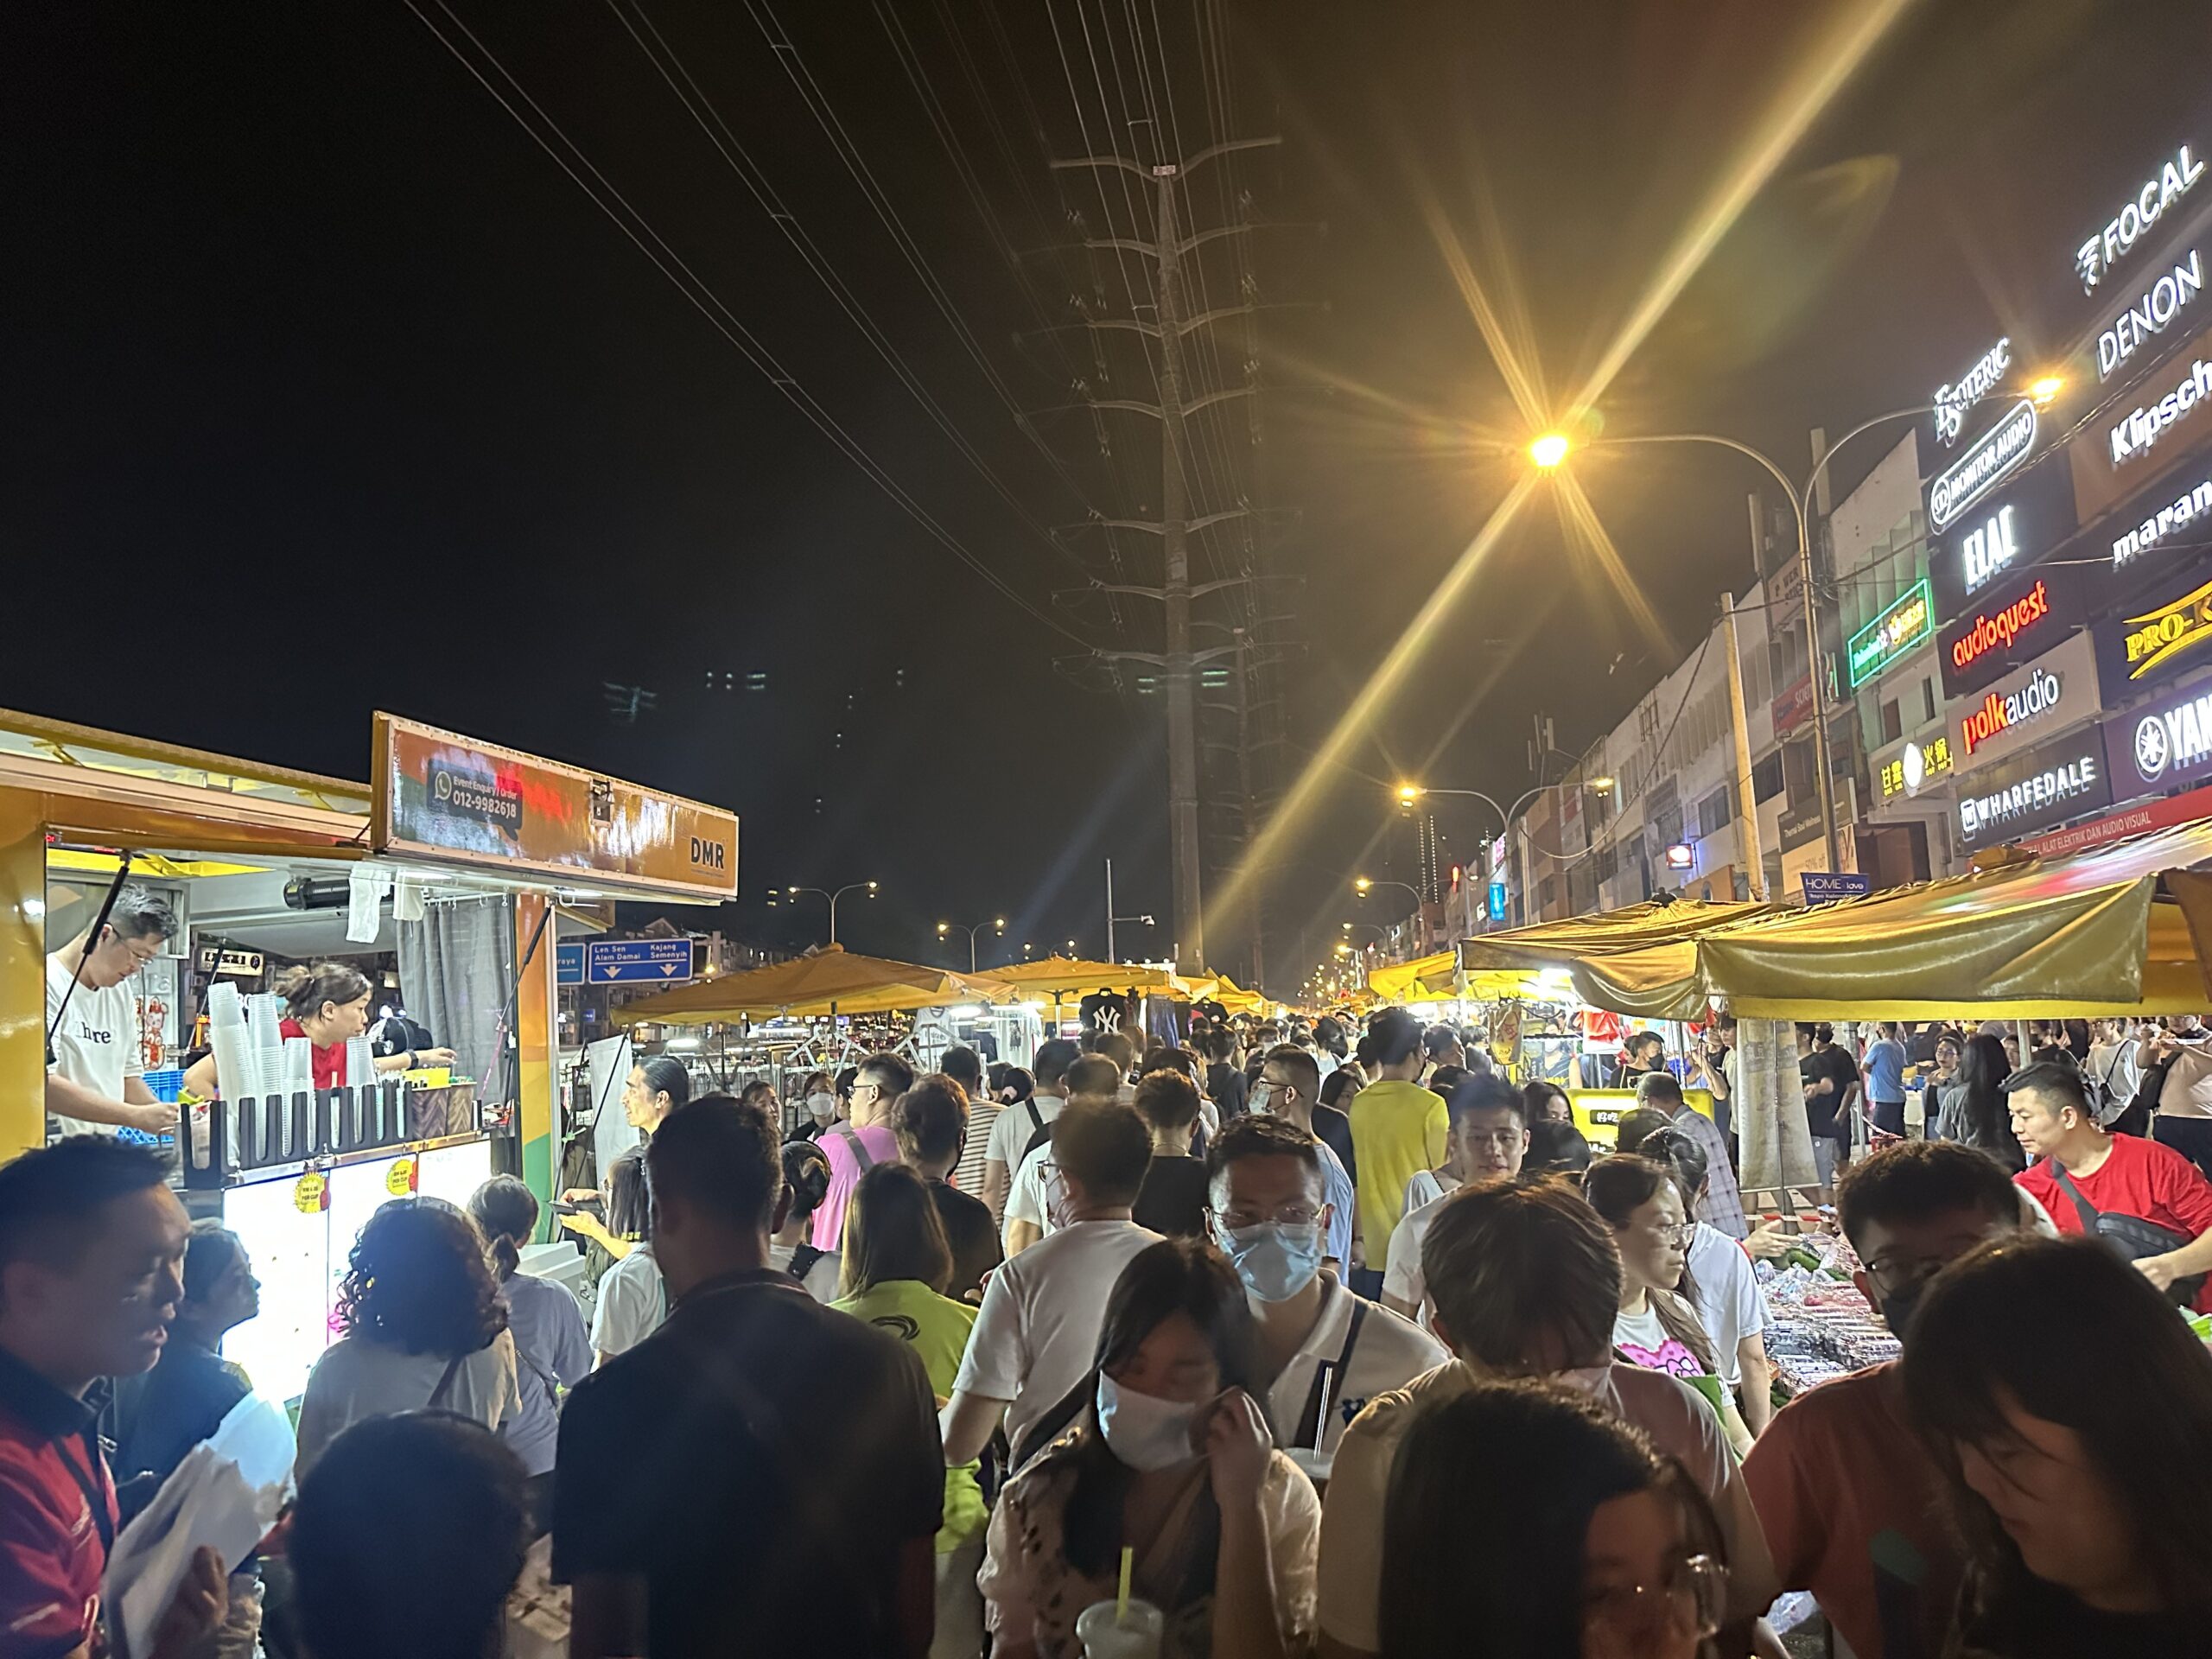 I waited more than 40 minutes to take bus t410 to the connaught night market. But it never came | weirdkaya